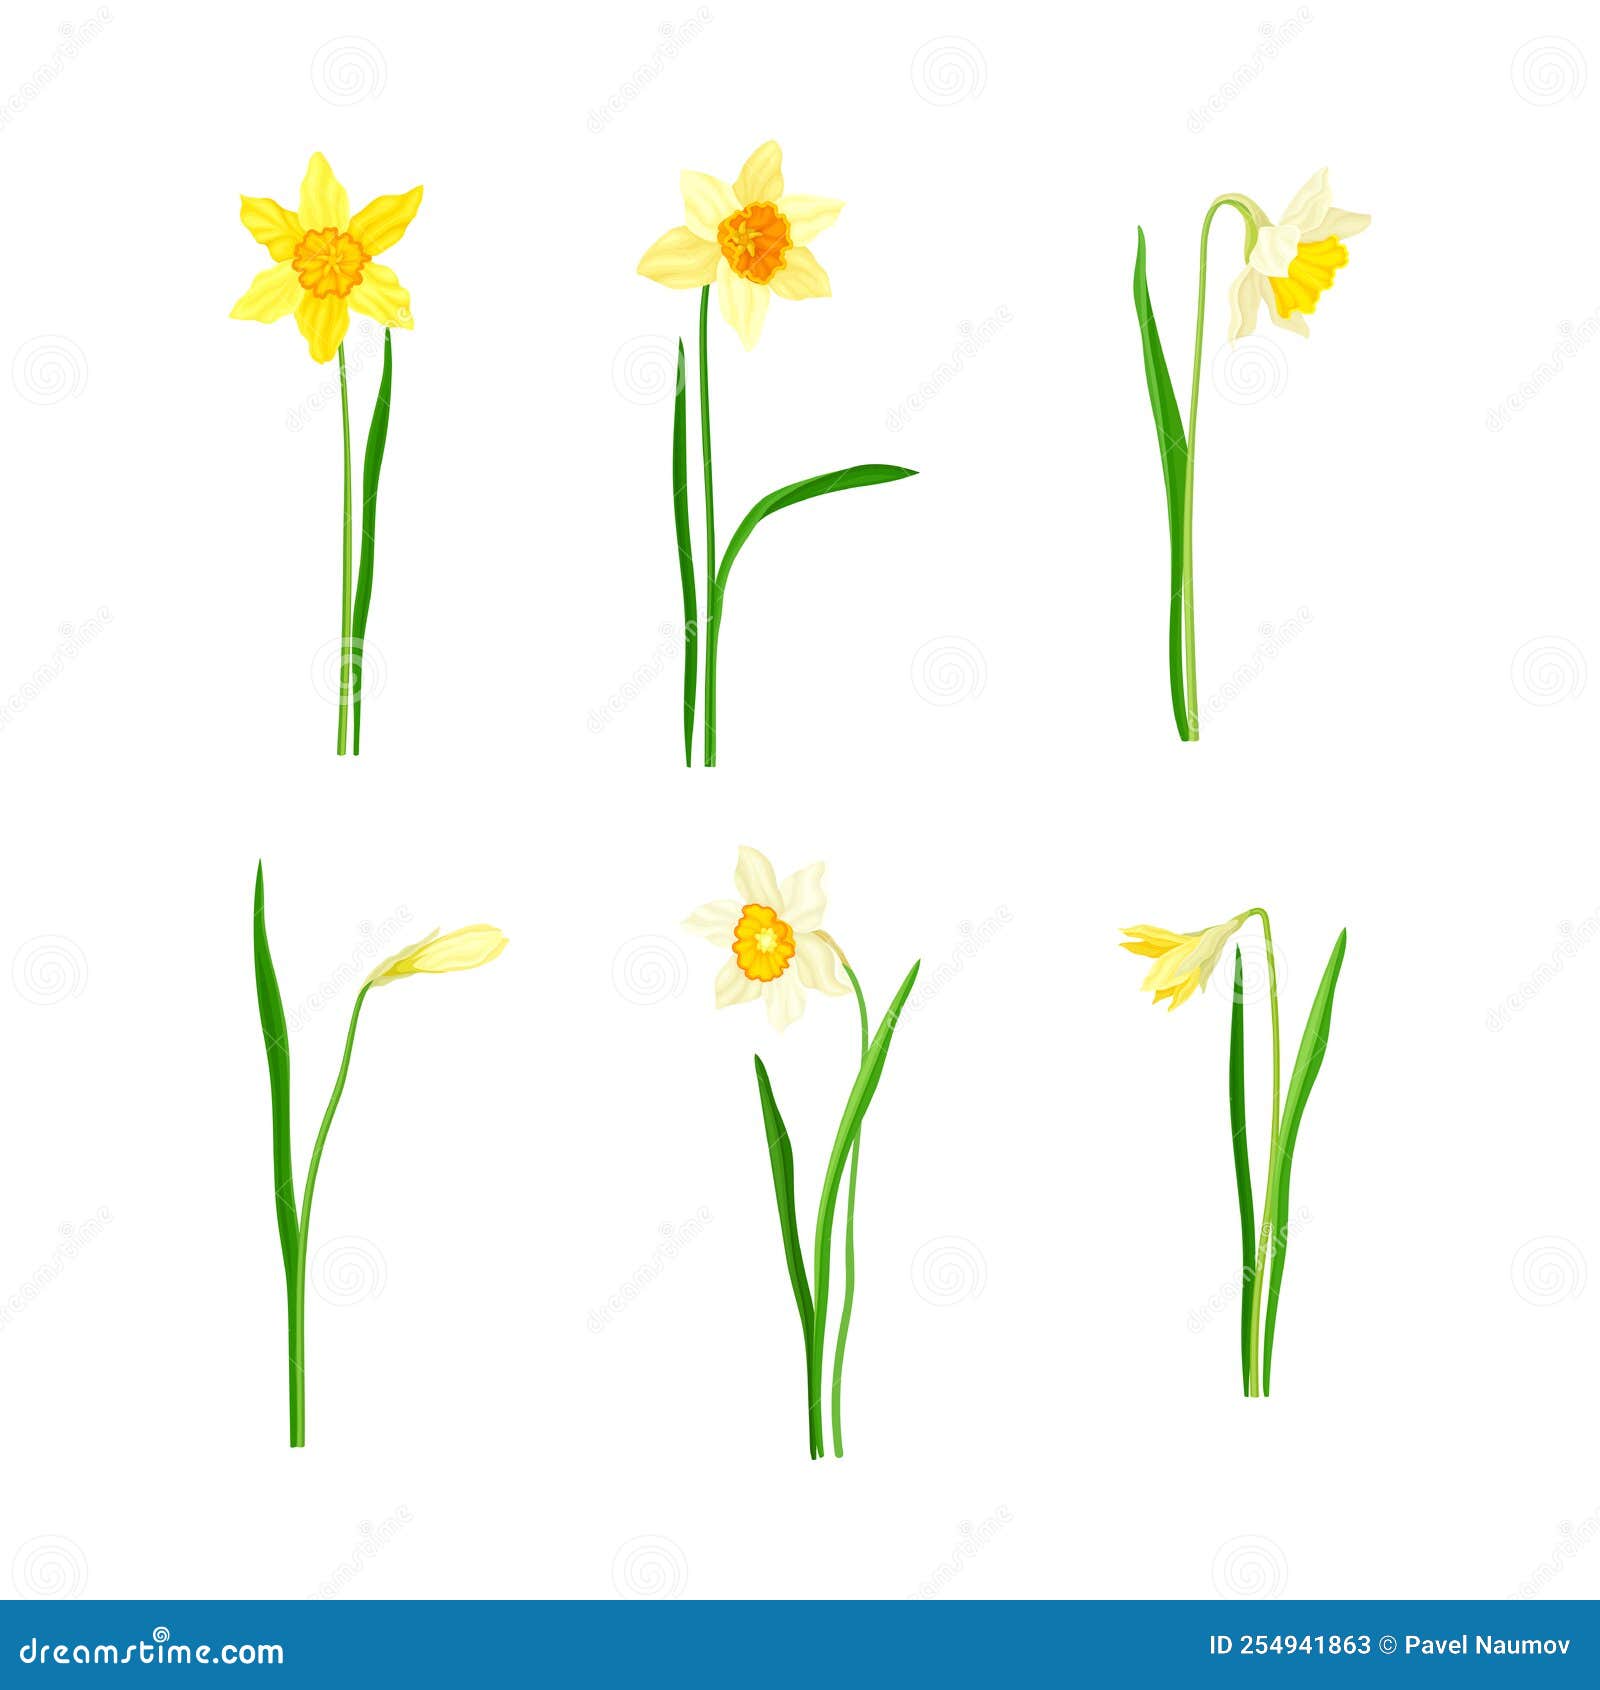 597 Daffodil Tattoo Images Stock Photos  Vectors  Shutterstock